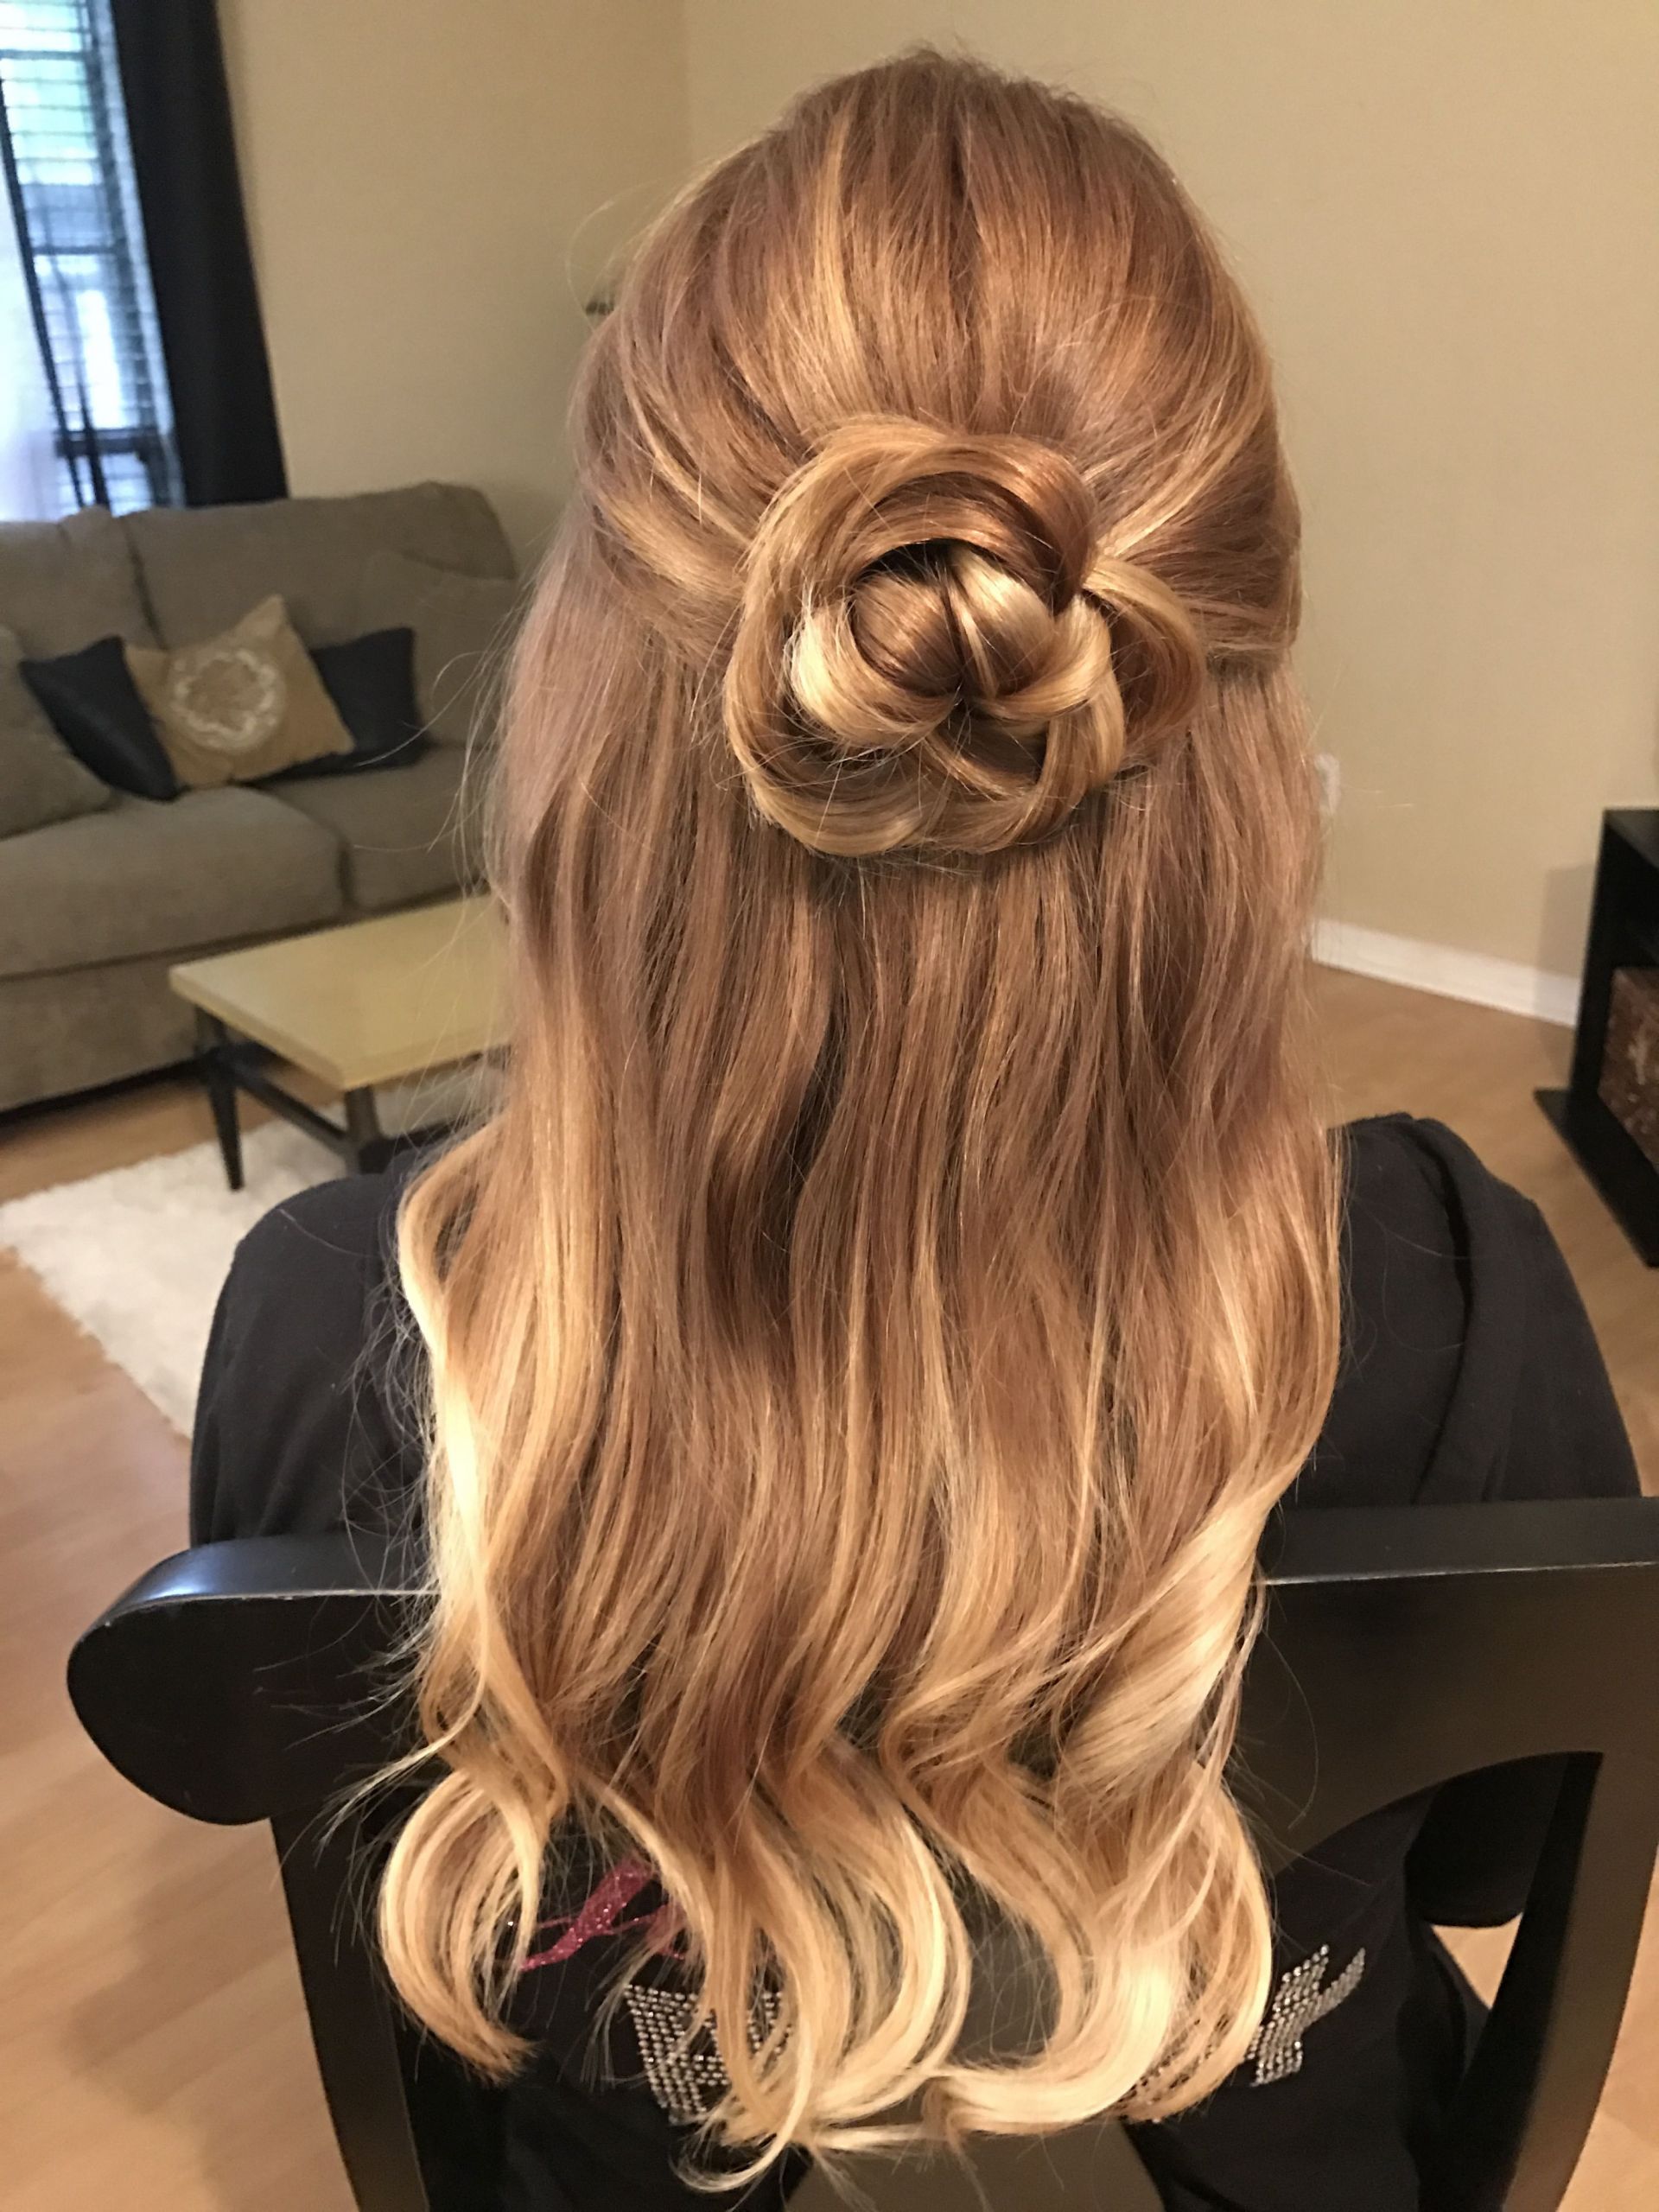 Half Up And Half Down Hairstyles For Prom
 Rose flower hair updo half up half down hairstyle for prom